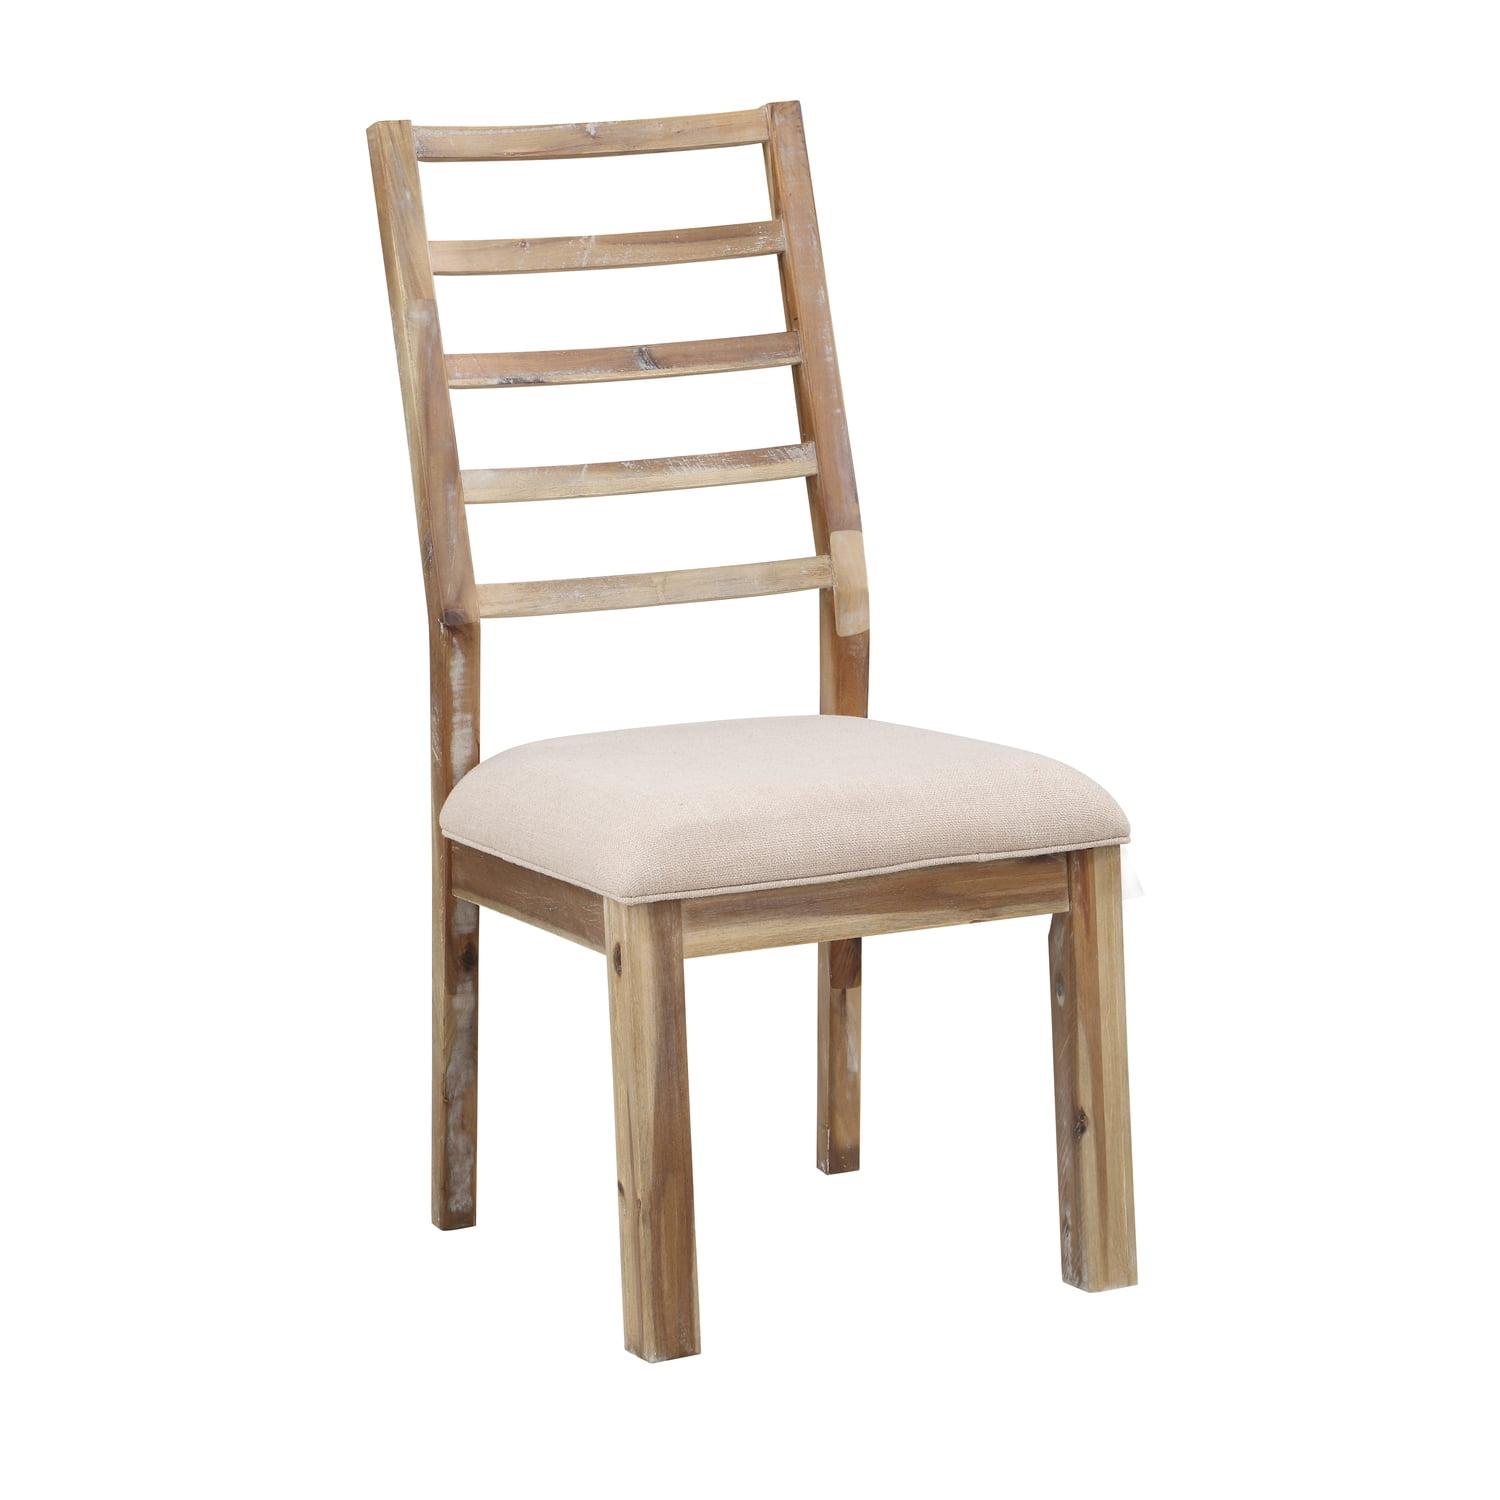 Rustic Sophistication Beige Upholstered Wood Dining Chair Set